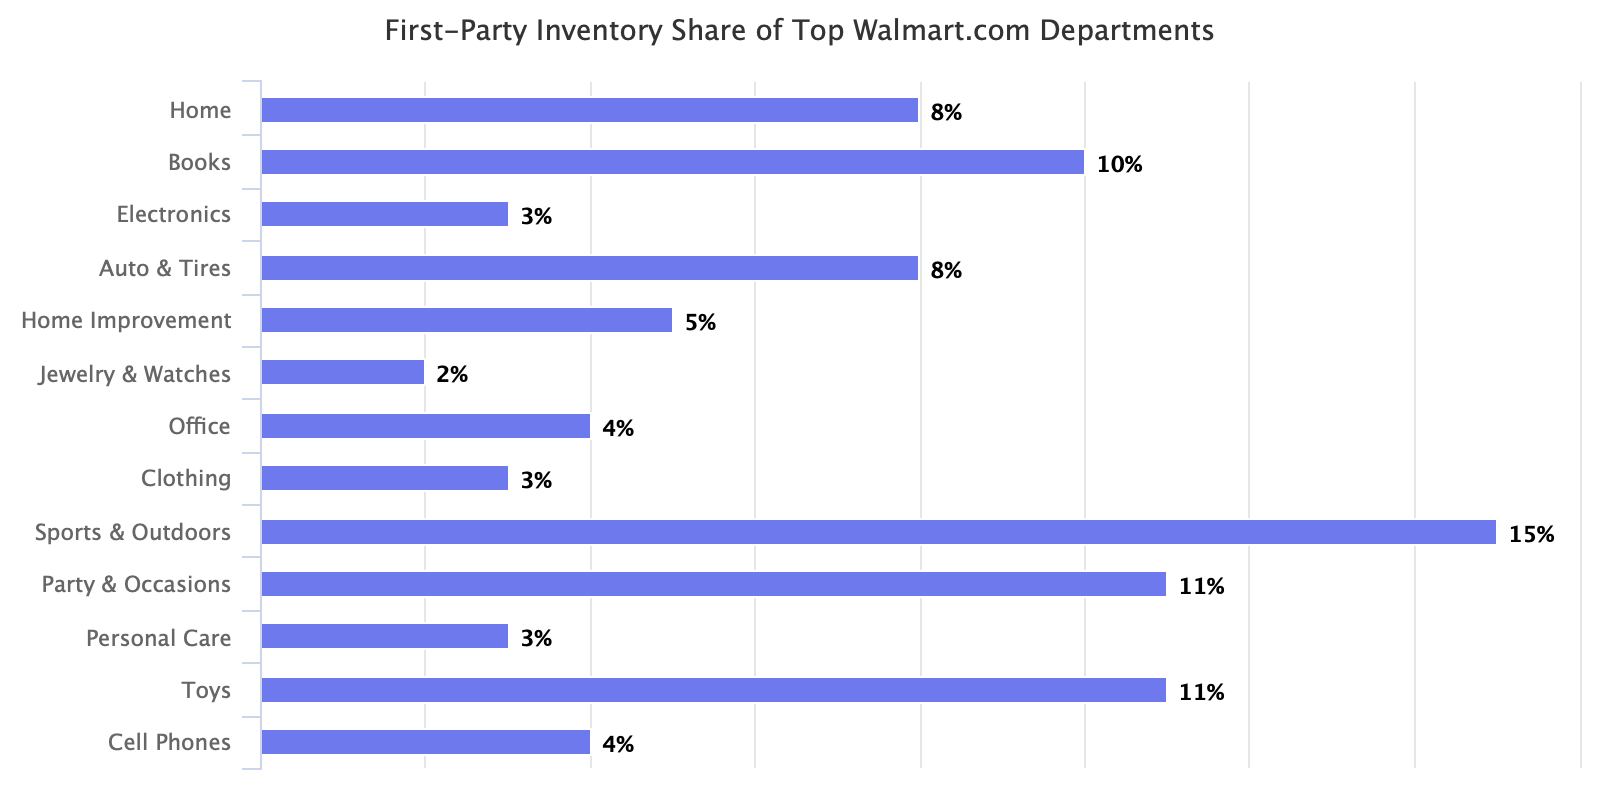 First-Party Inventory Share of Top Walmart.com Departments